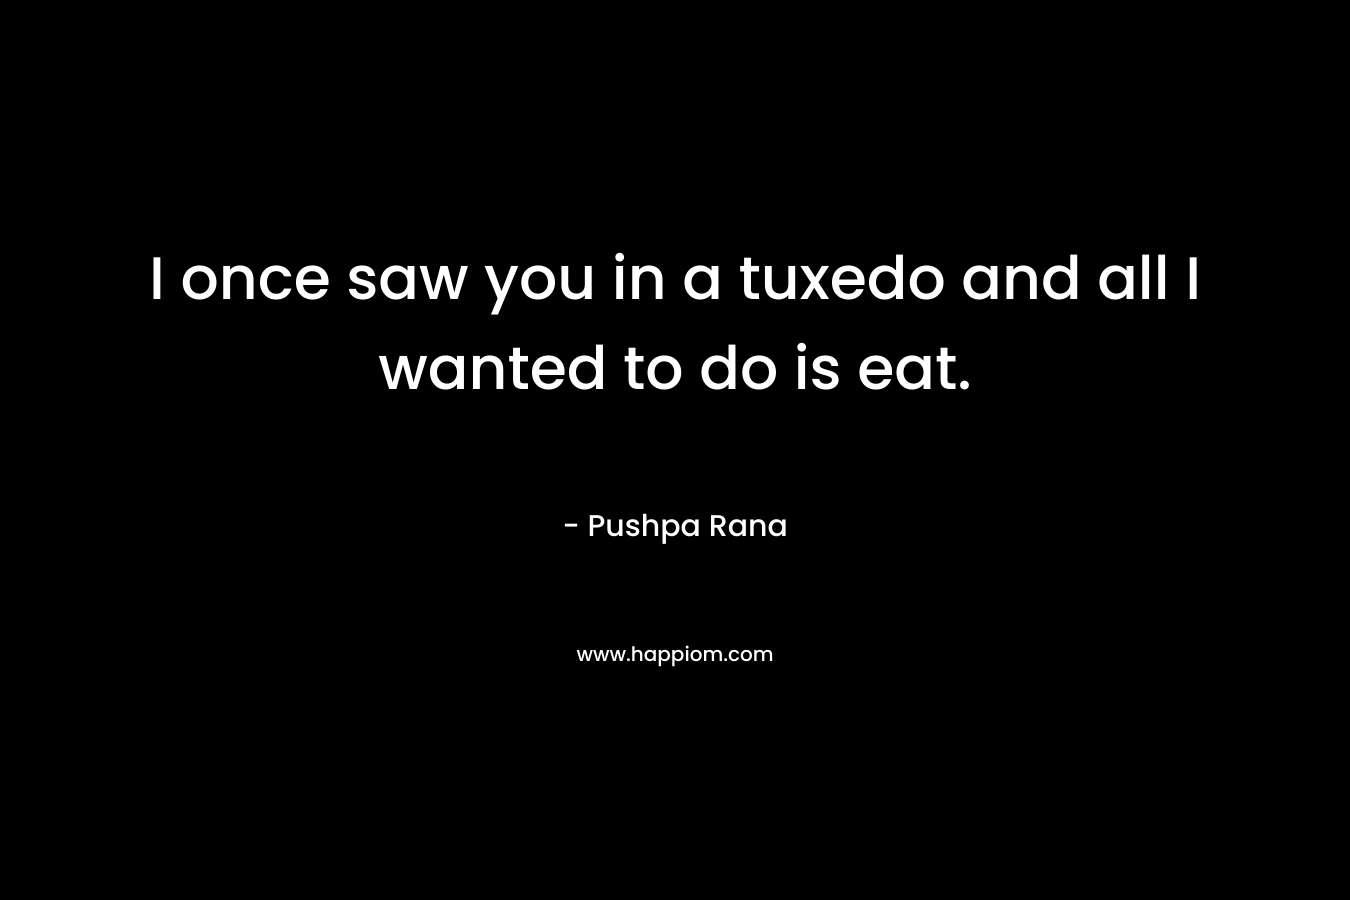 I once saw you in a tuxedo and all I wanted to do is eat. – Pushpa Rana